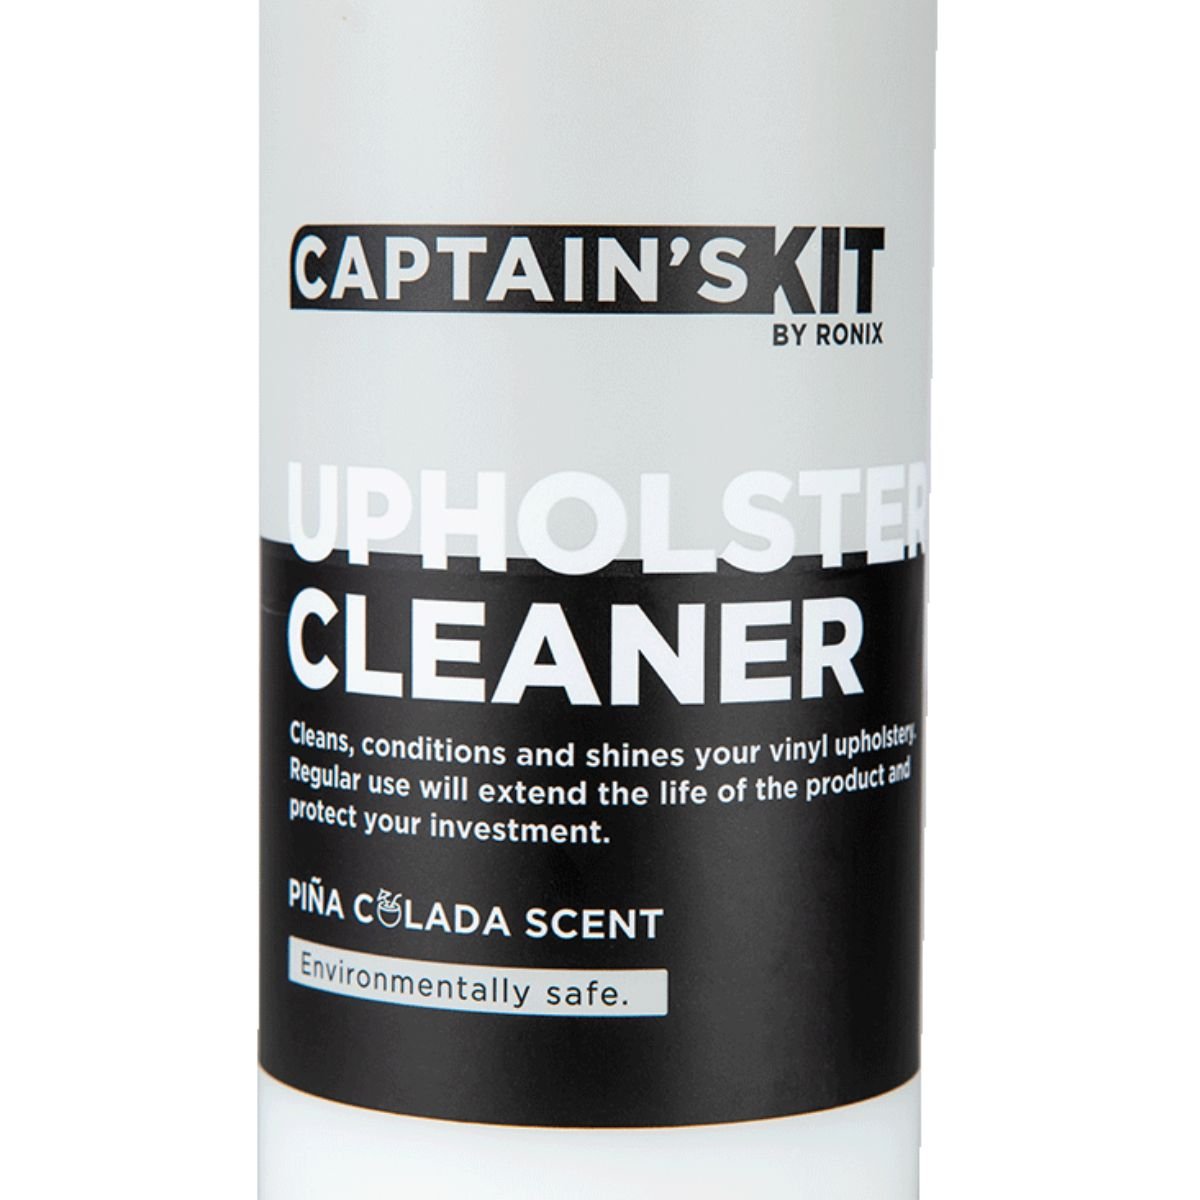 Ronix Captain's Kit Upholstery Cleaner - Pina Colada - 16oz - 6 pack - BoardCo